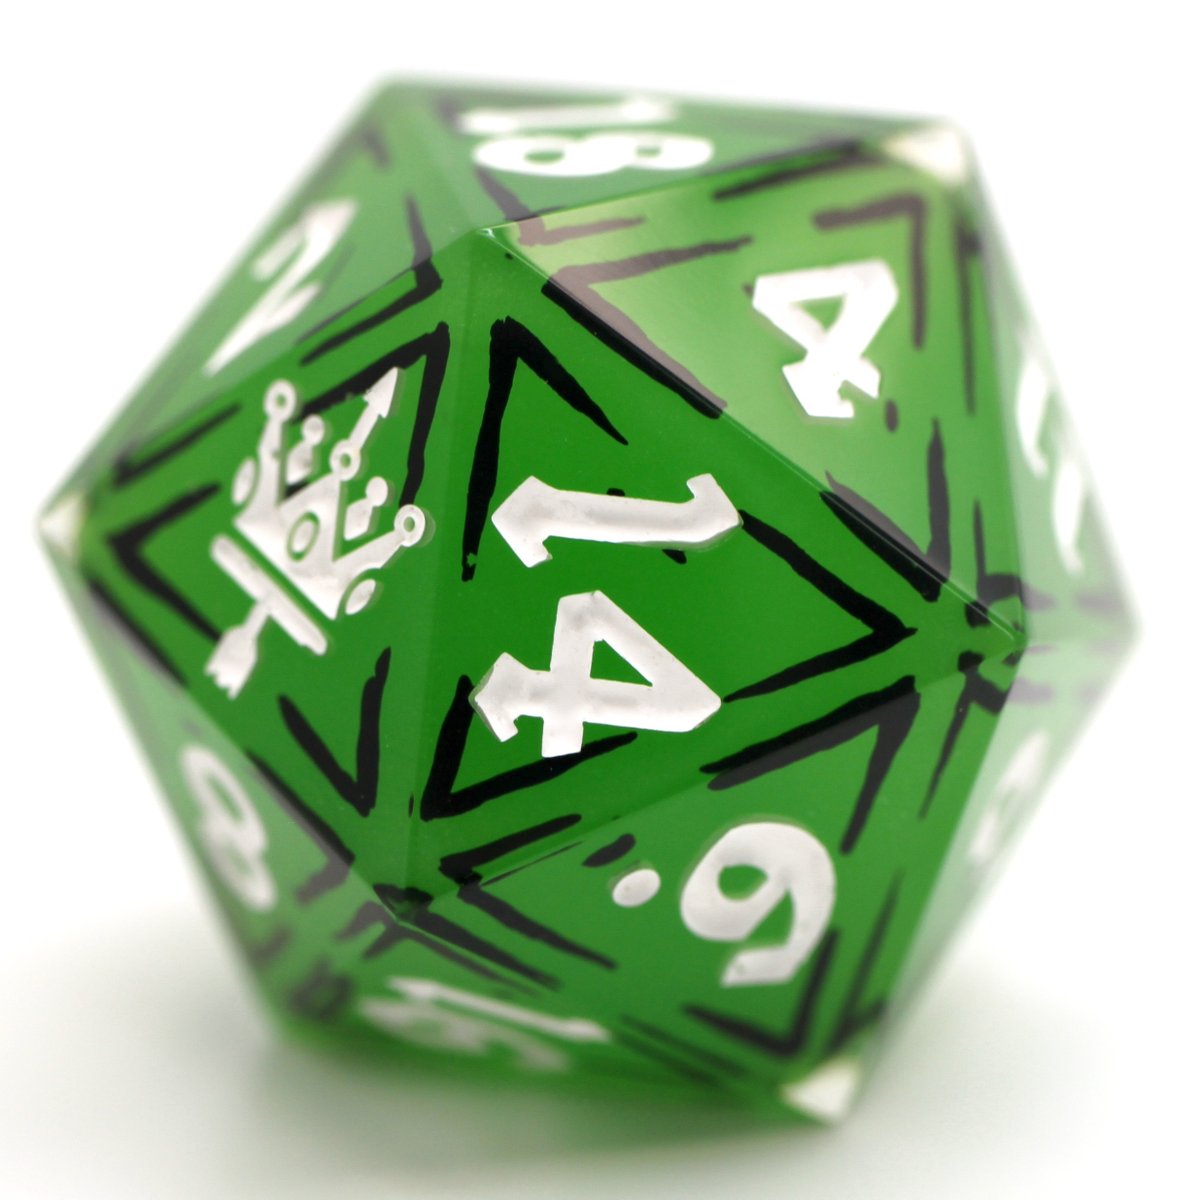 It seems I've been on a green kick lately for some reason lol 💚 Another Cel Shaded chonk for my restock this weekend! #dice #DnD #CelShading